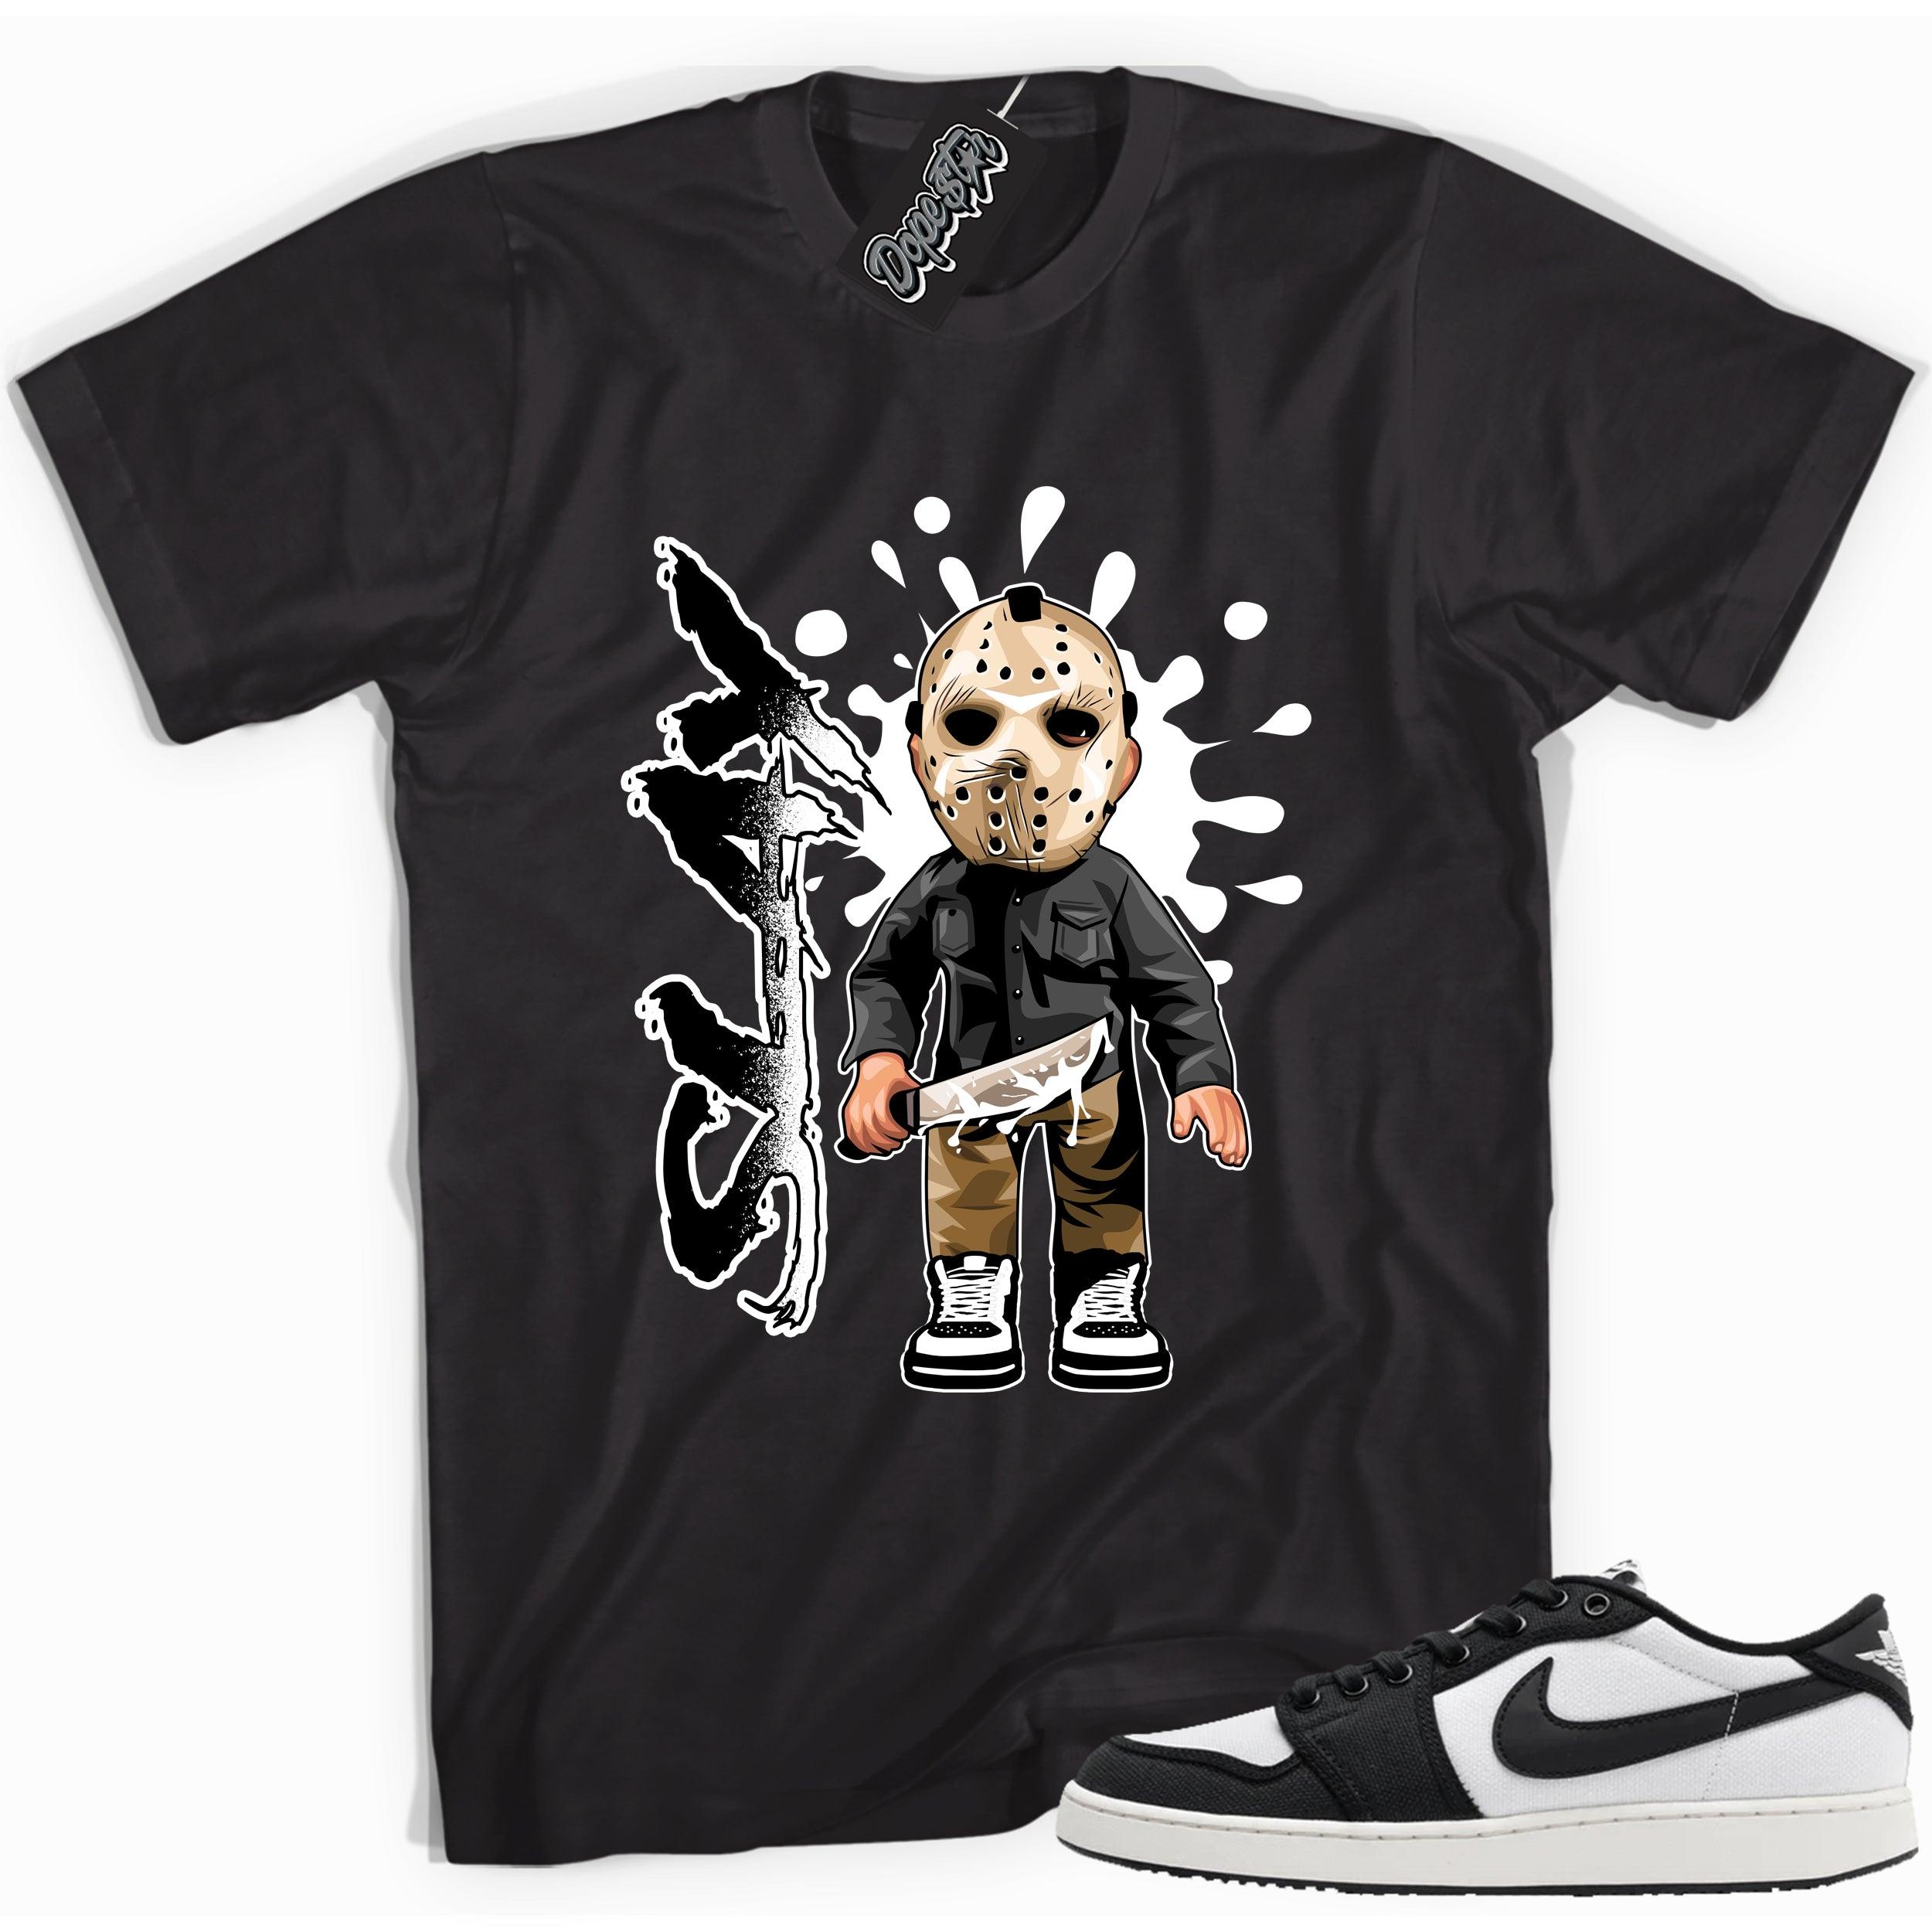 Cool black graphic tee with 'slay' print, that perfectly matches Air Jordan 1 Retro Ajko Low Black & White sneakers.